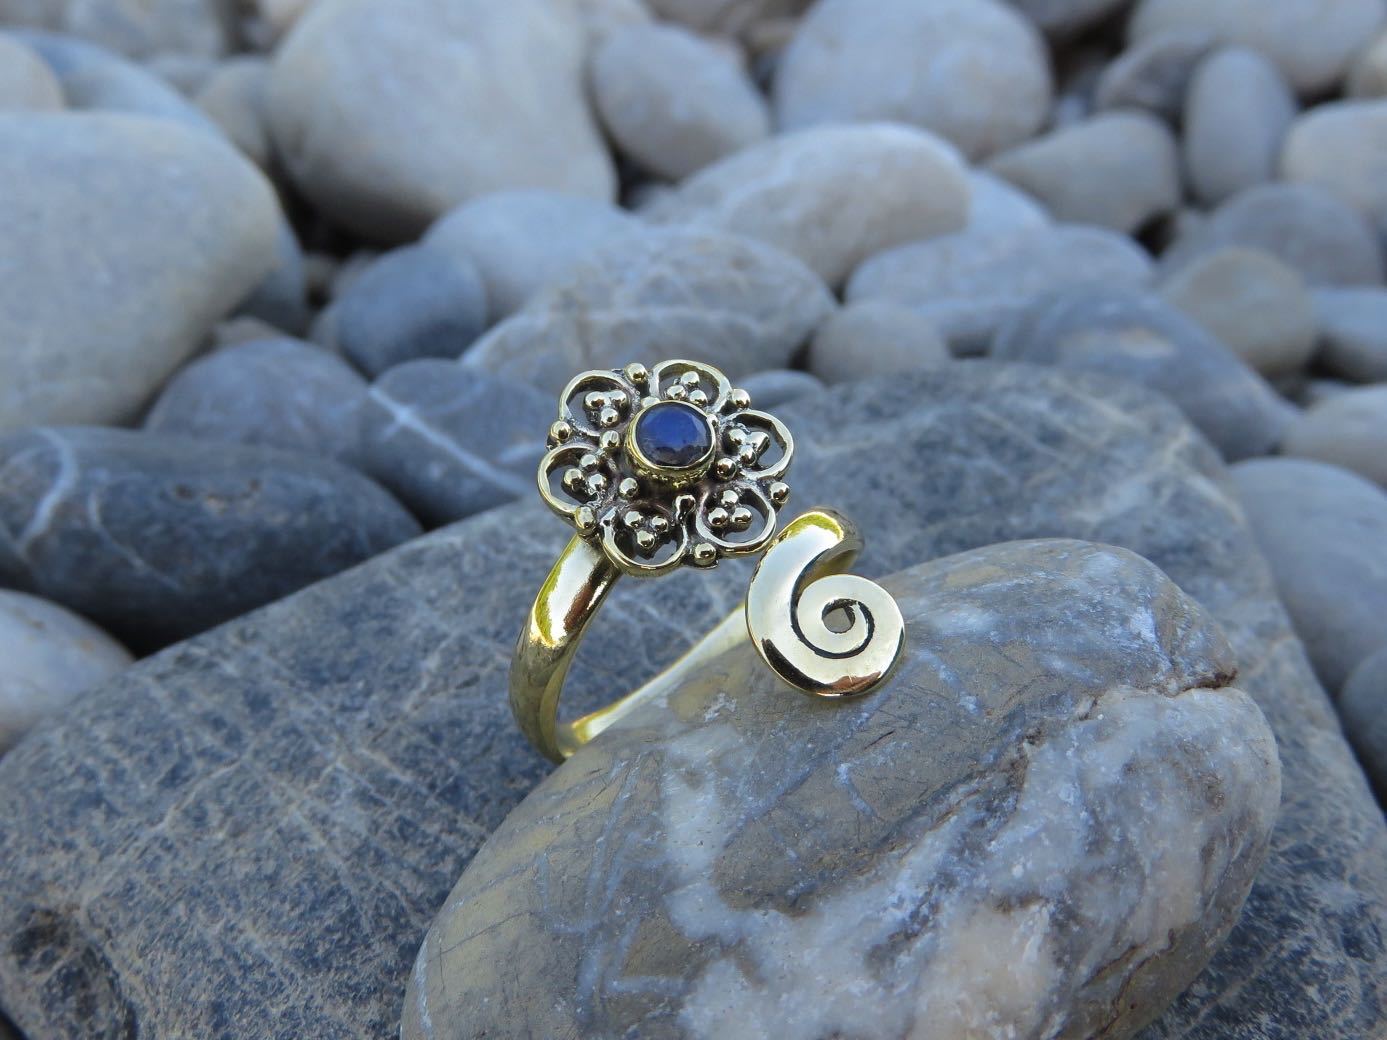 Toe ring with flower and spiral made of brass 